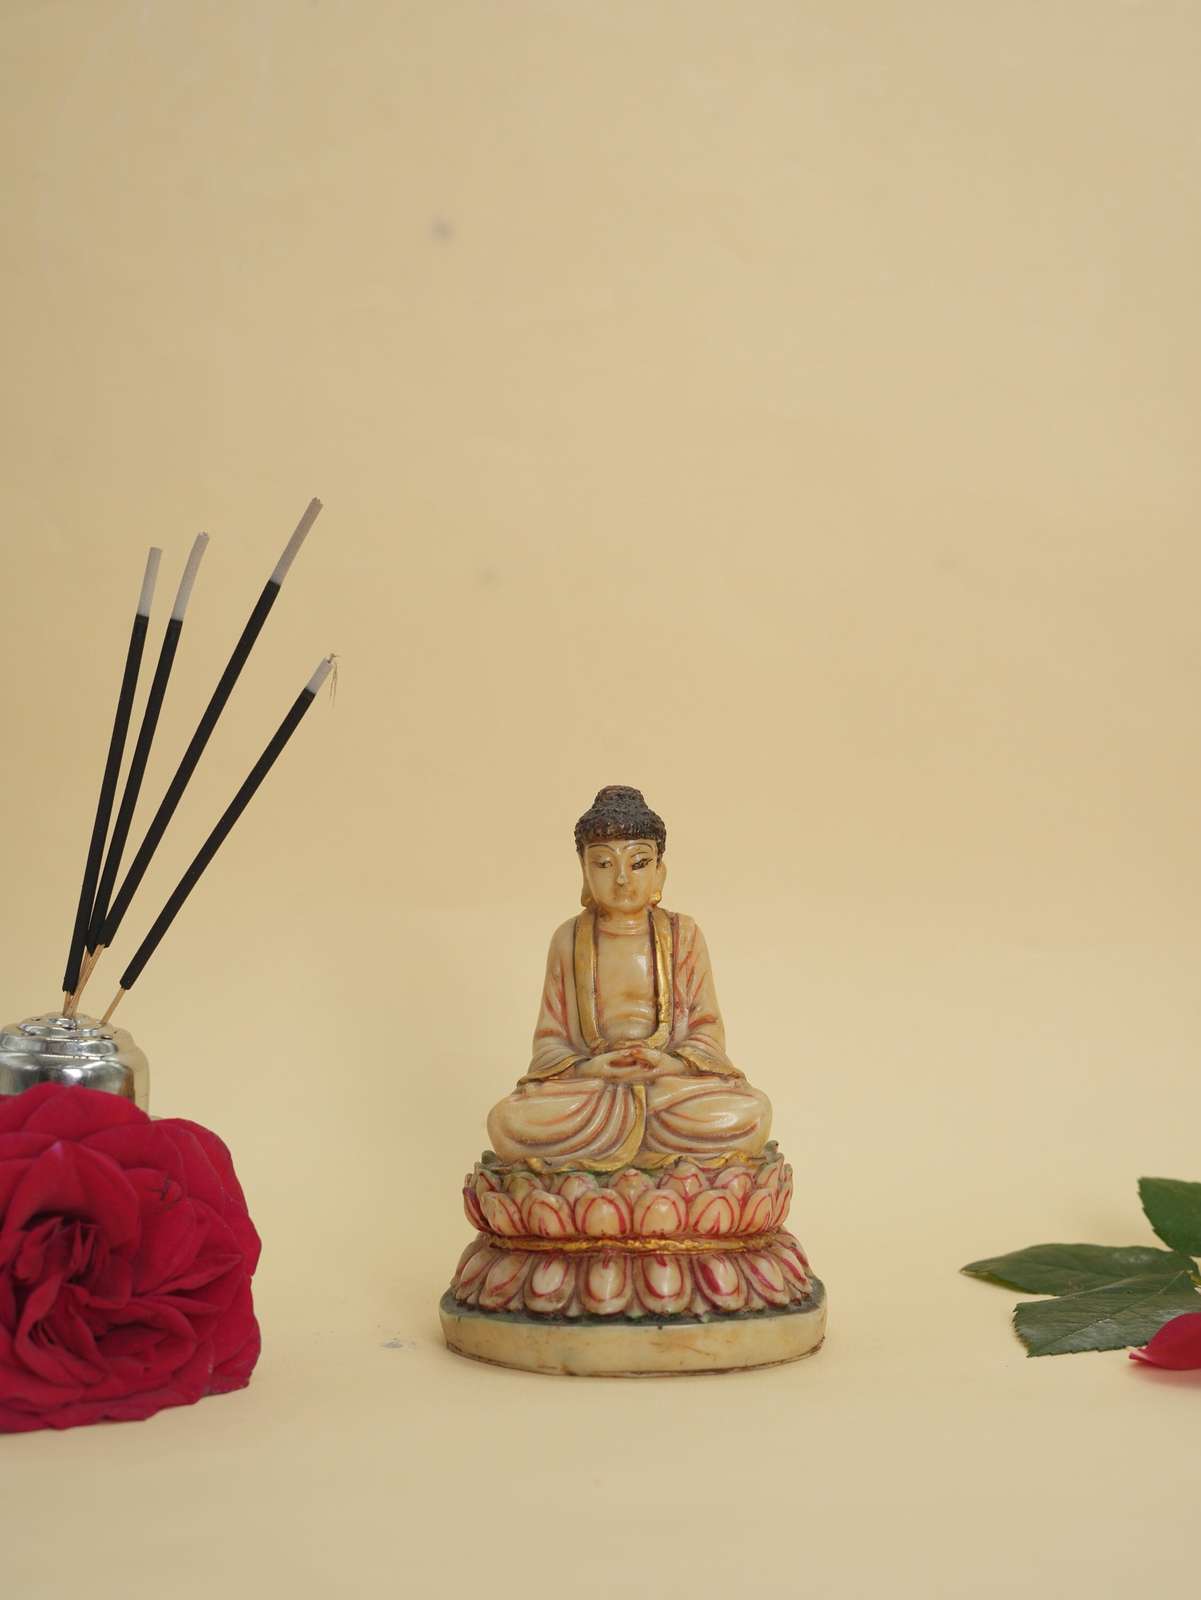 Primary image for Crimson Serenity: Marble Red Sitting Buddha on Lotus, Tranquil Elegance Unveiled